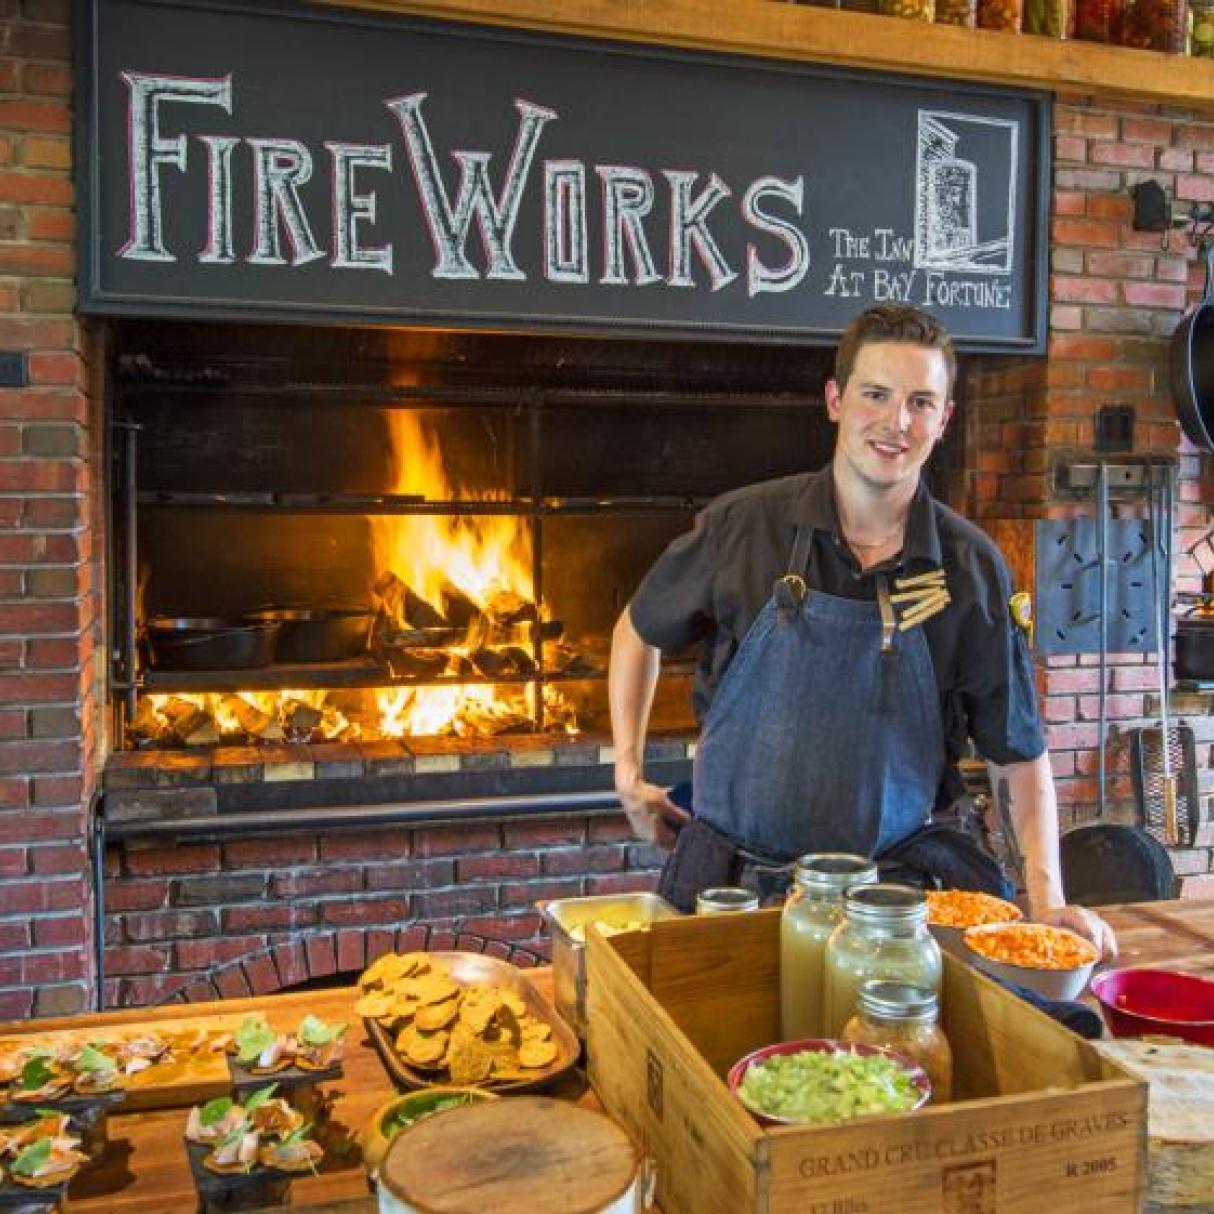 A chef cooks food over an open wood stove